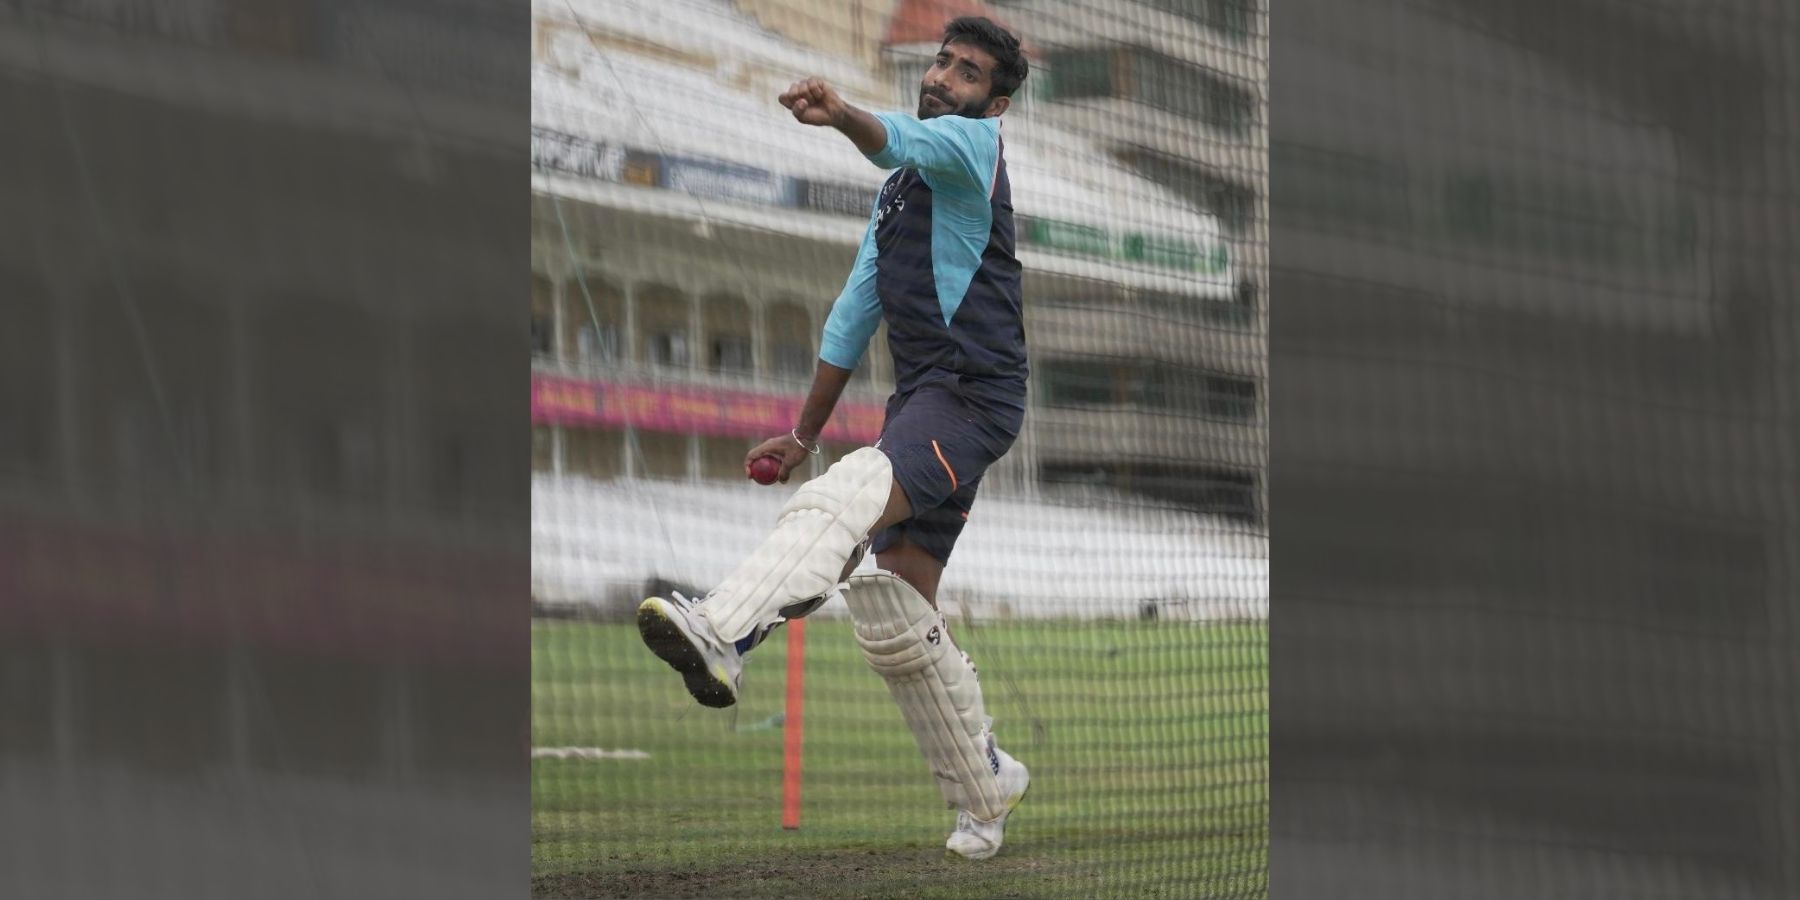 India tour of England: Jasprit Bumrah takes Twitter by storm, does bowling practice wearing batting pads - BCCI shares photo